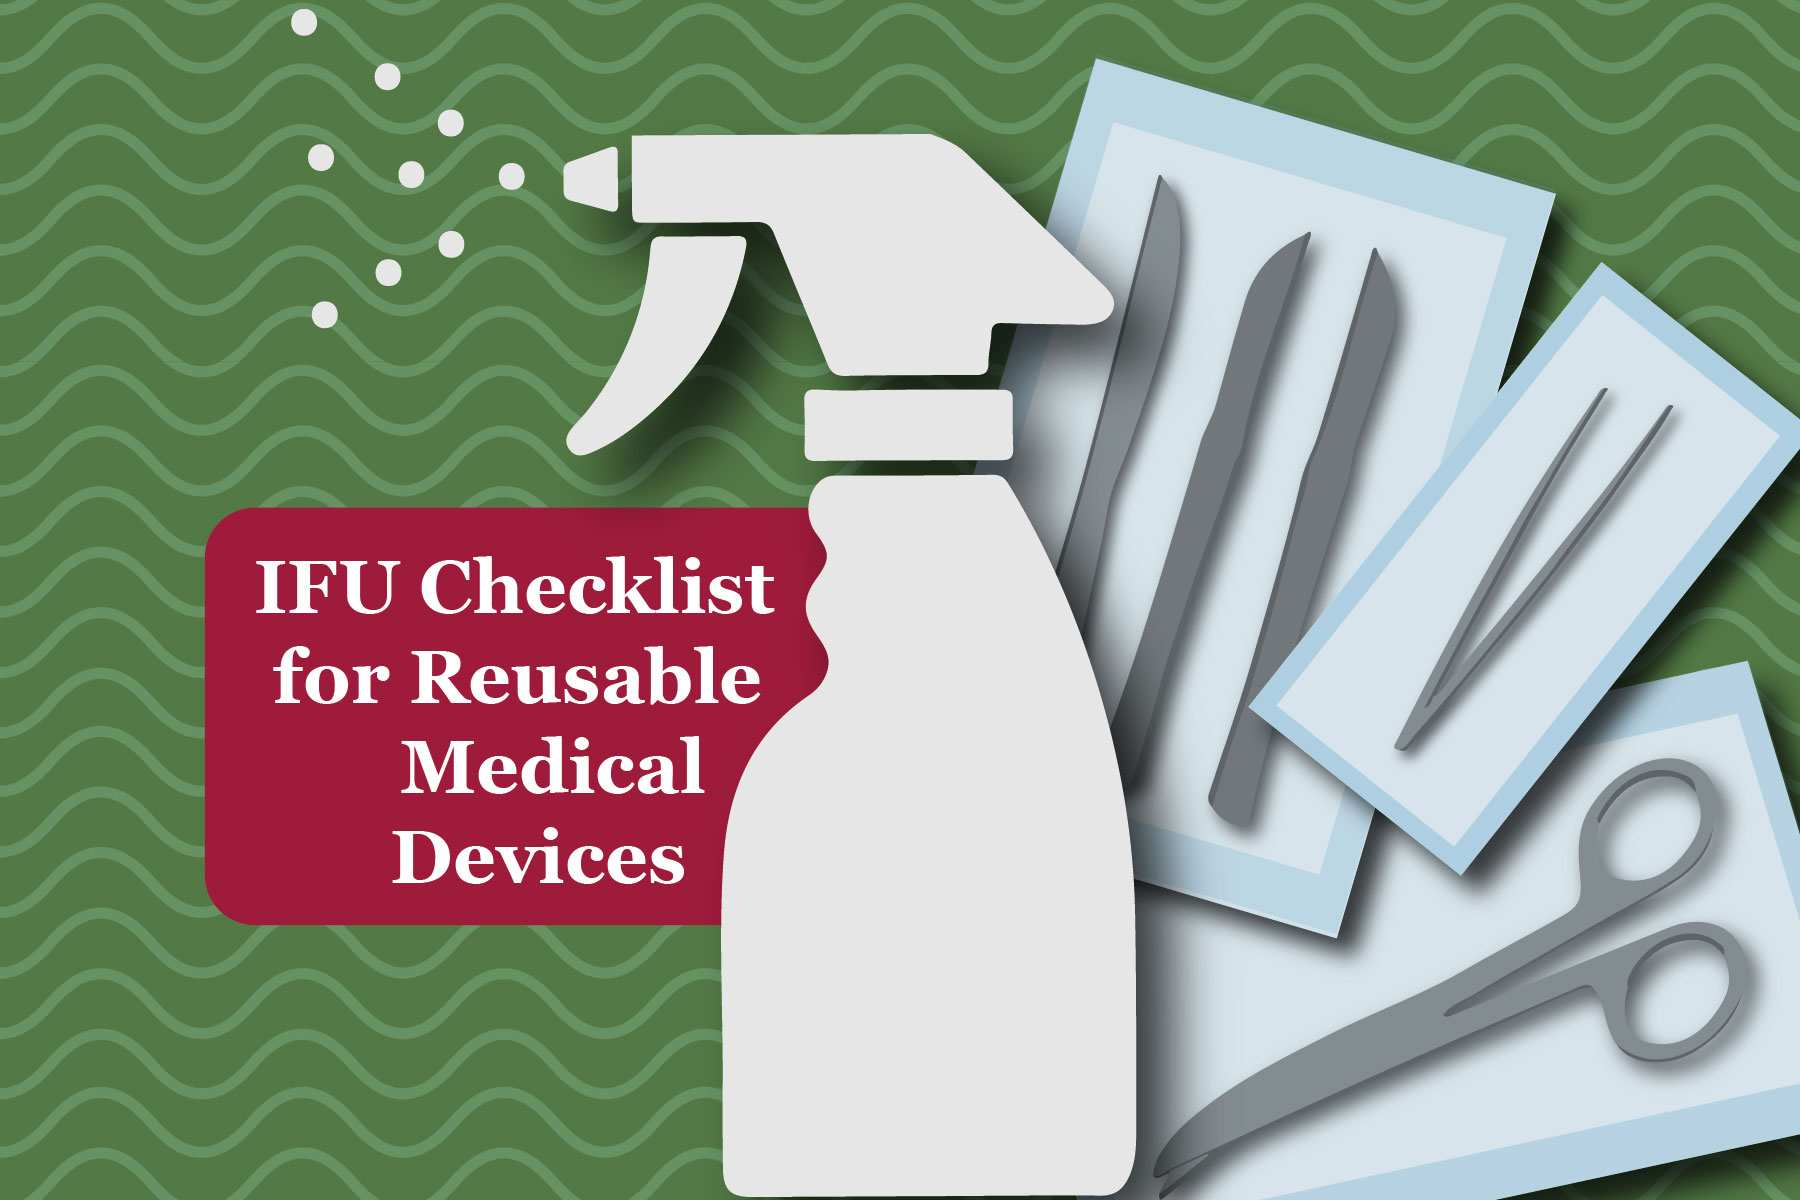 IFU Checklist for Reusable Medical Devices